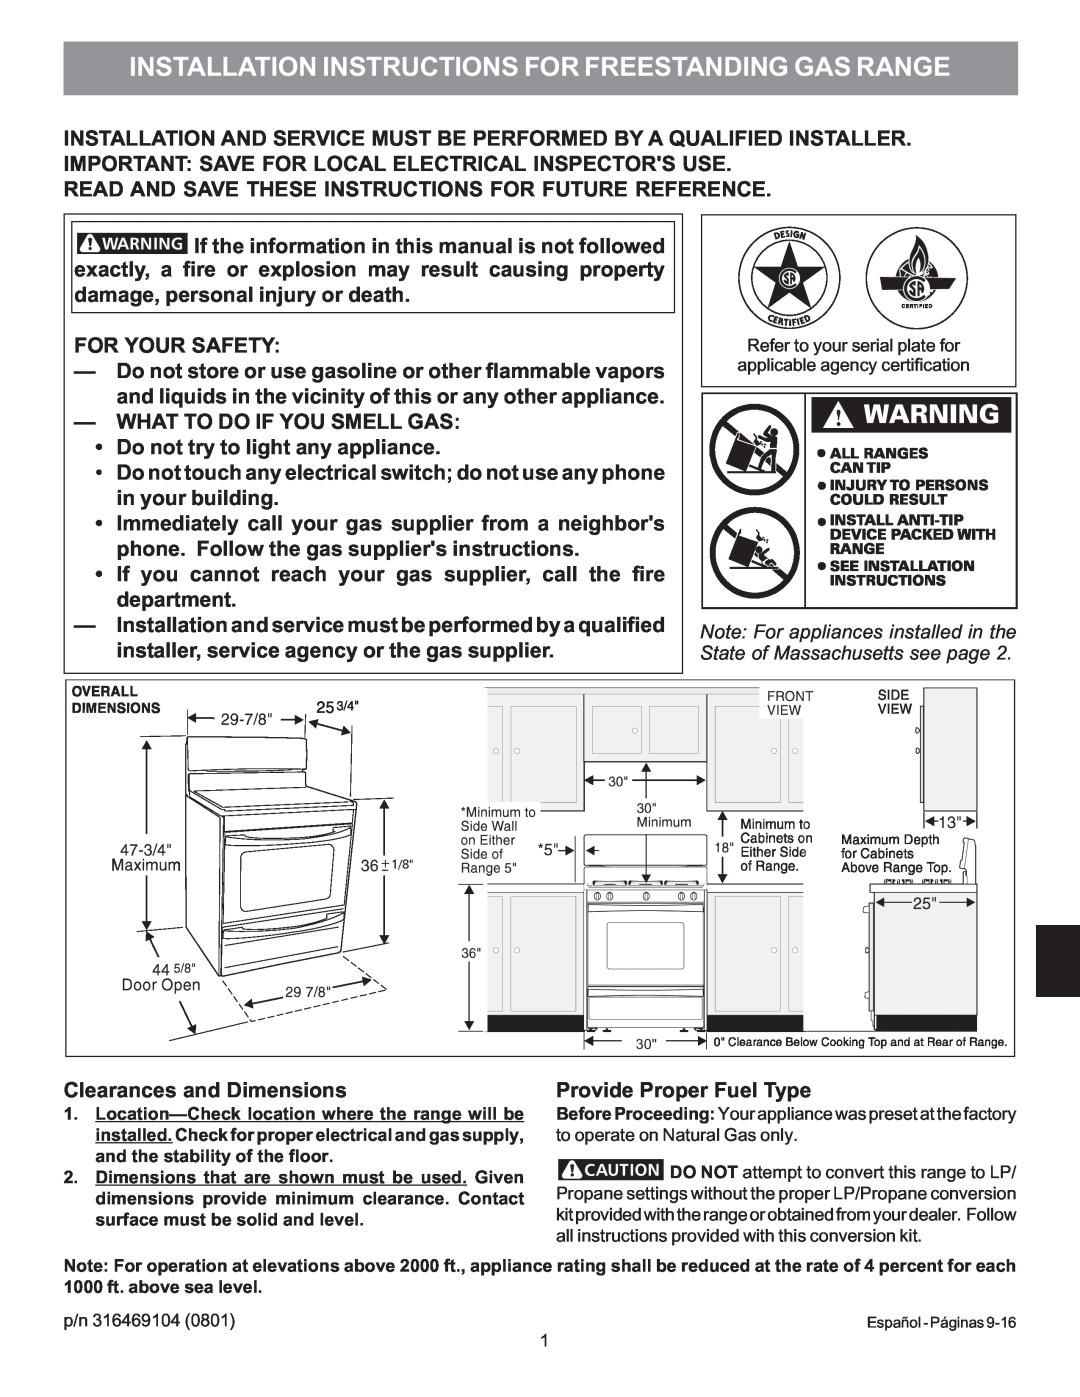 Electrolux 316469104 Installation Instructions For Freestanding Gas Range, For Your Safety, Clearances and Dimensions 